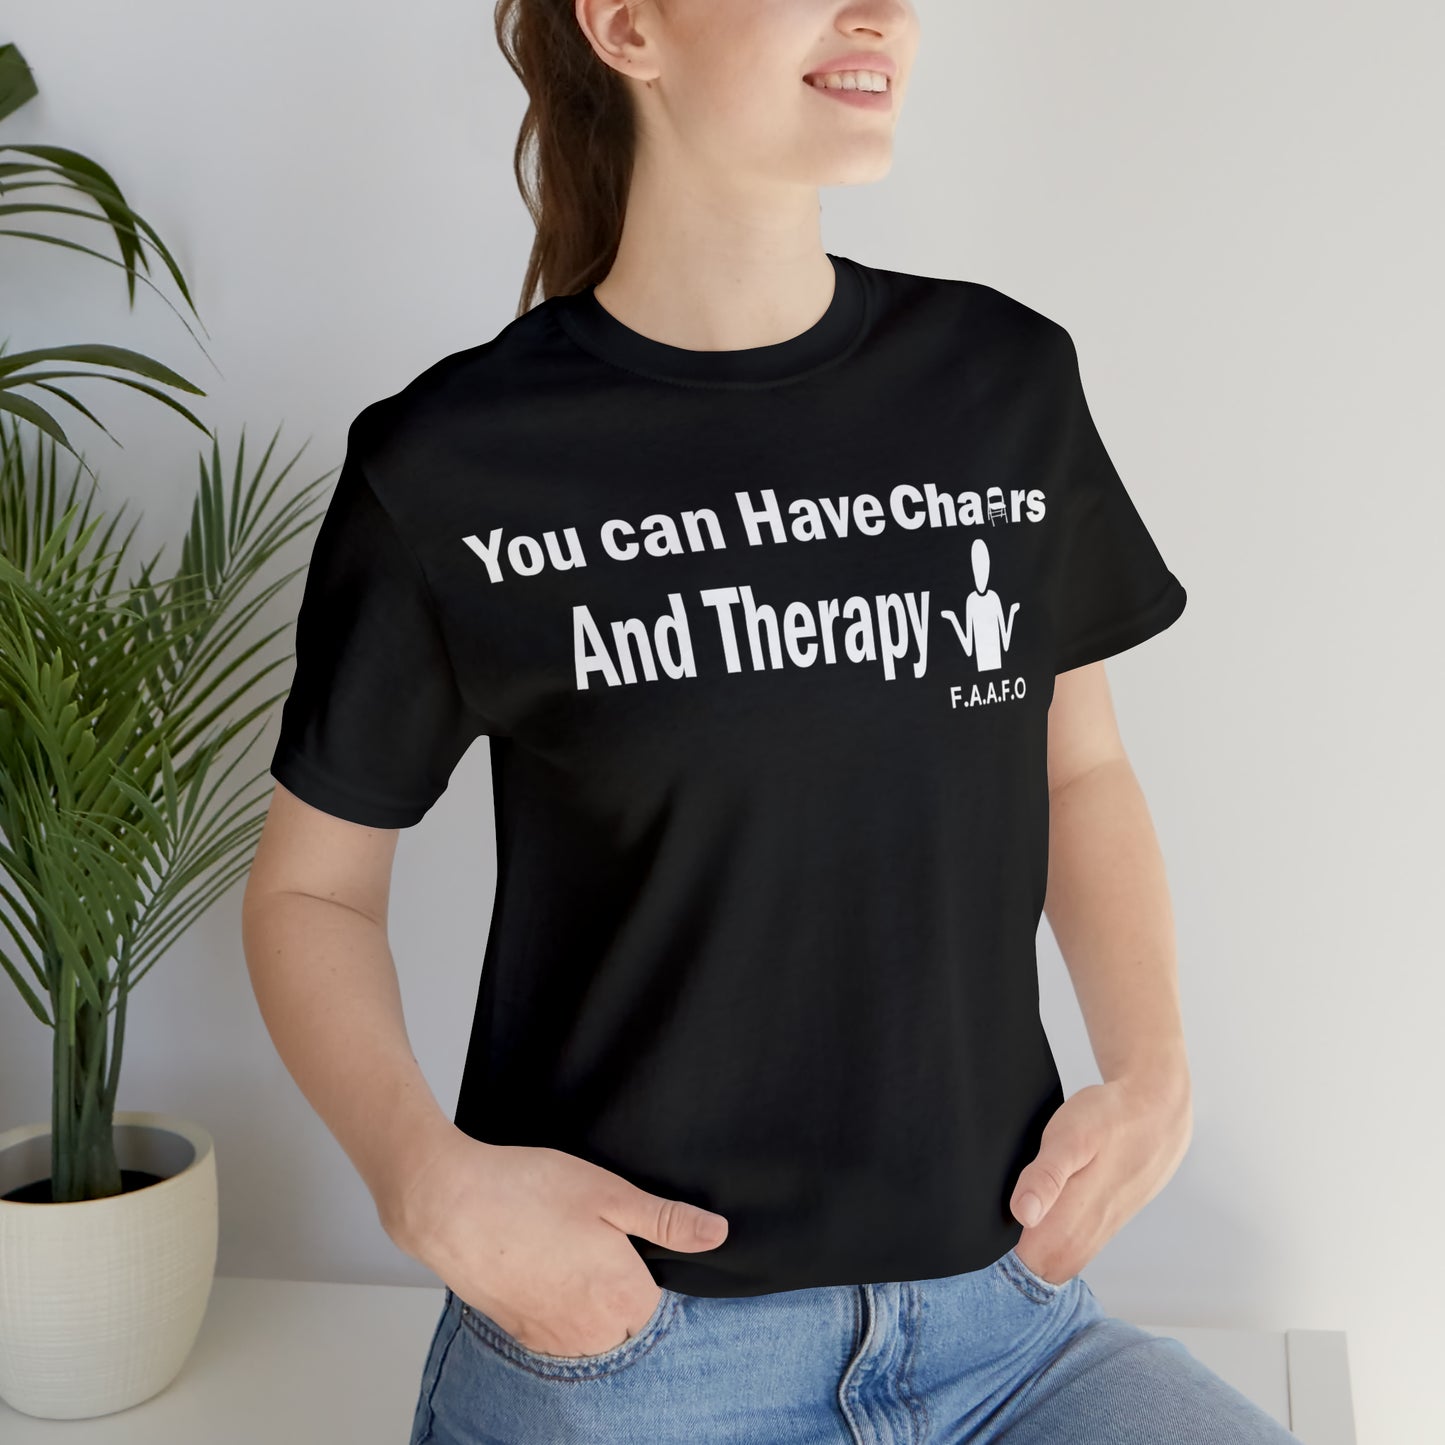 Chairs and Therapy